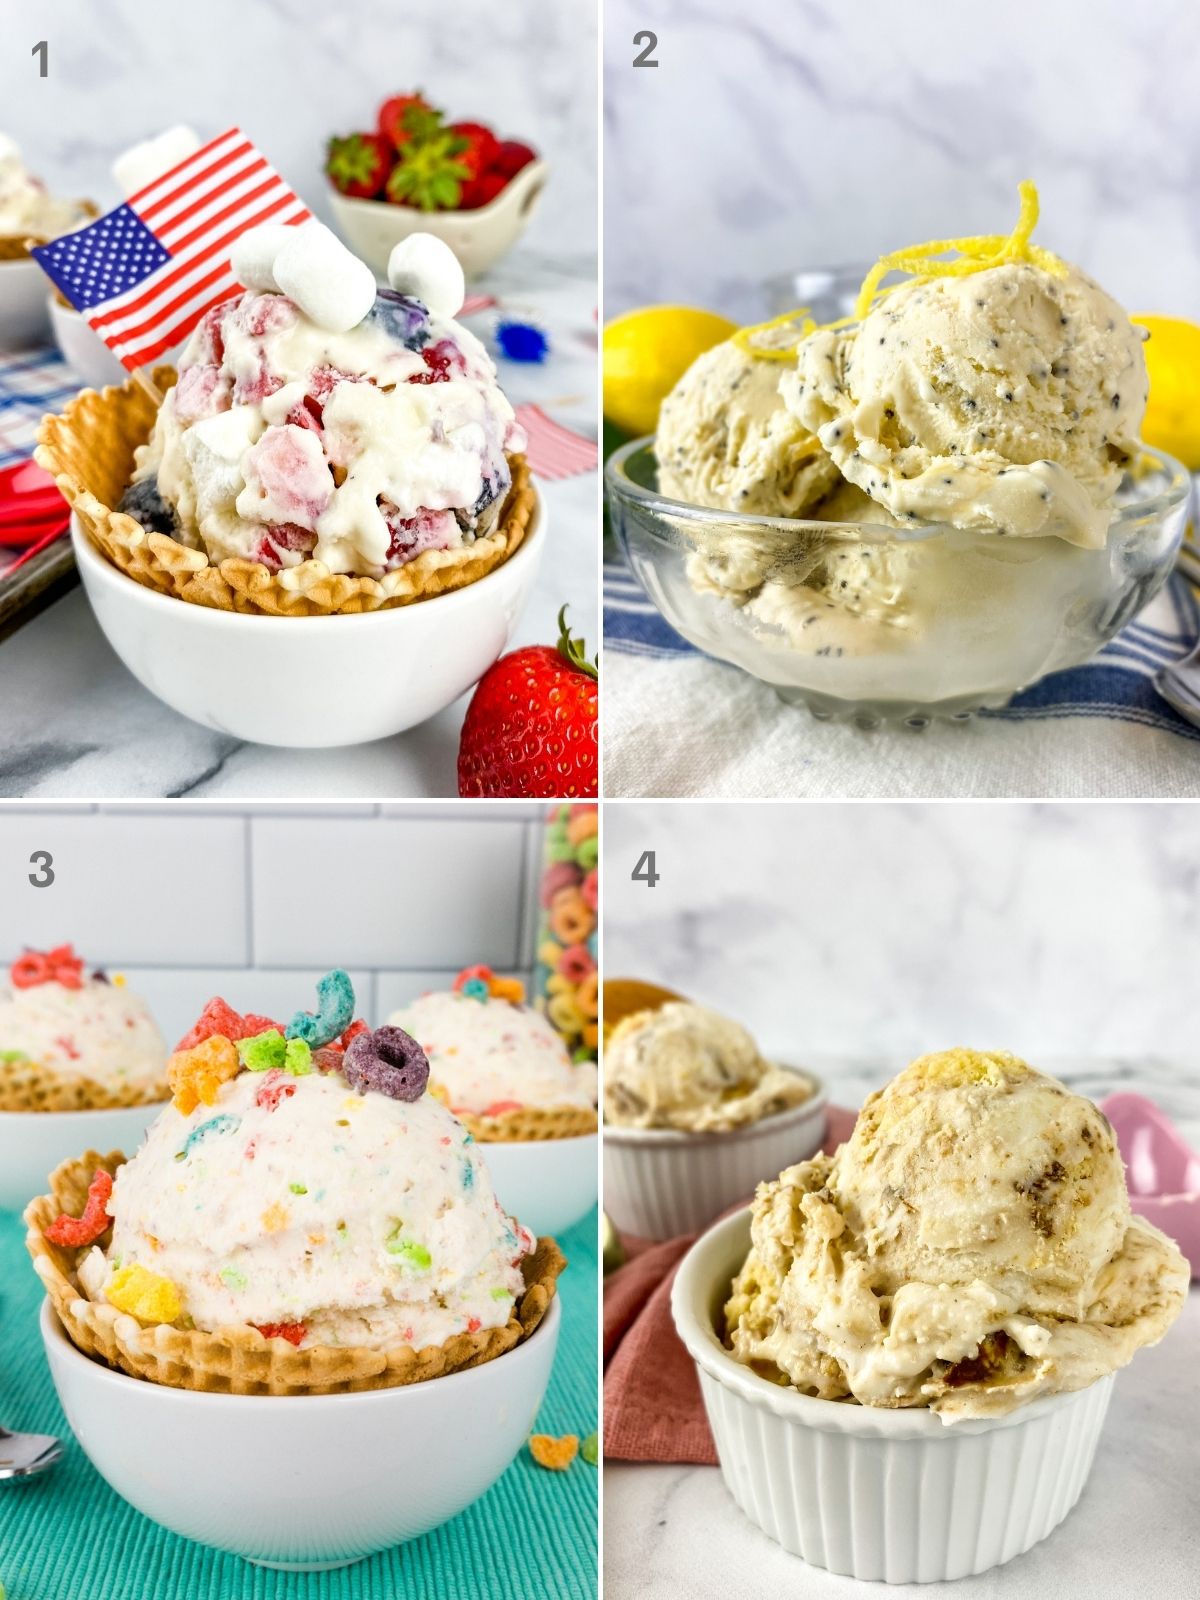 Four vanilla ice cream flavors with berries and cold cereal